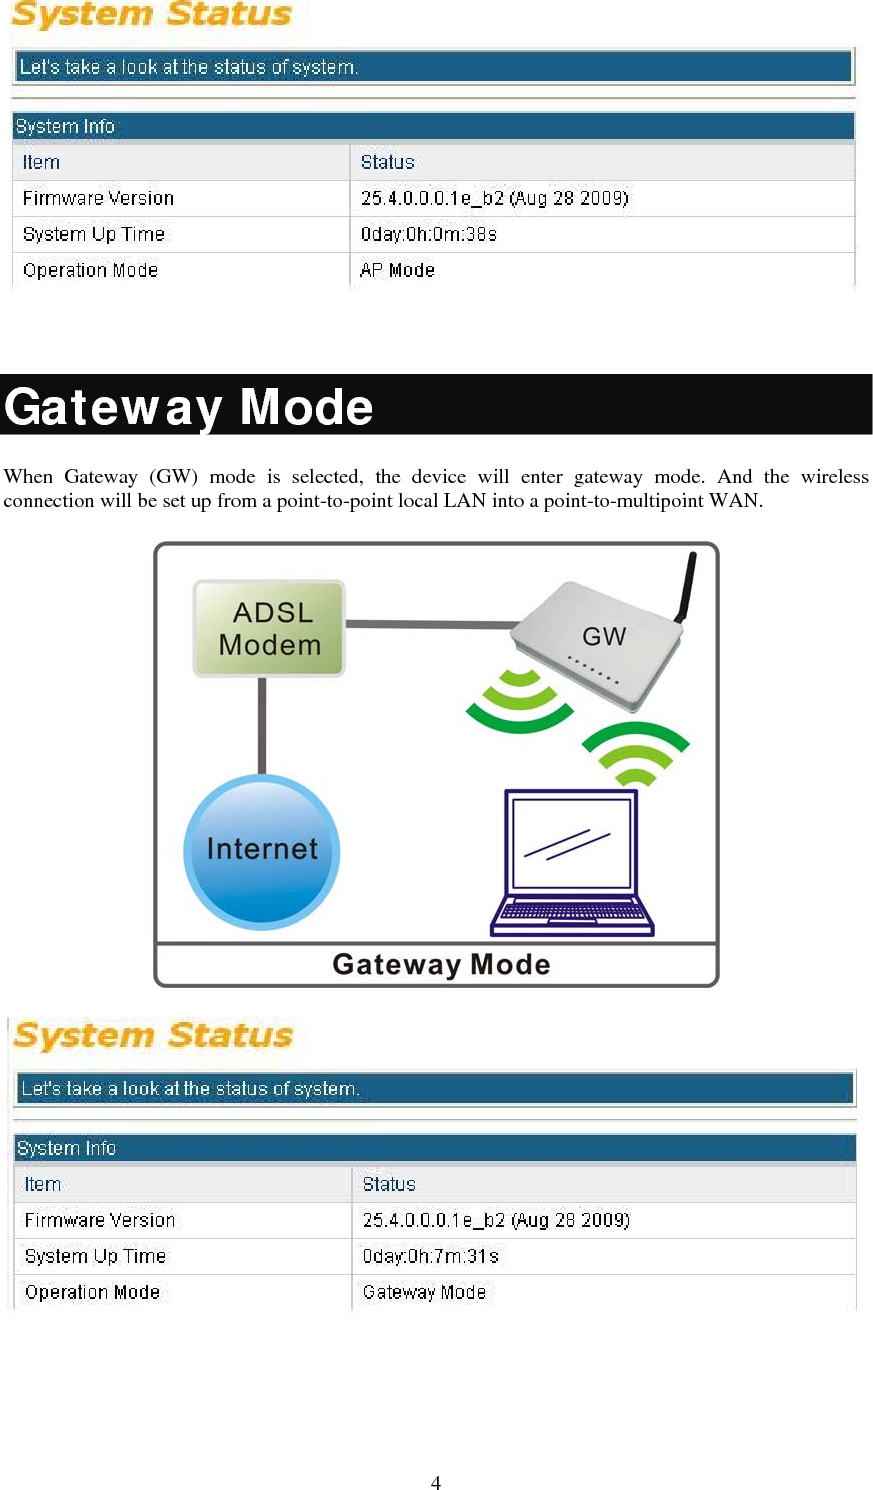   4  Gateway Mode When Gateway (GW) mode is selected, the device will enter gateway mode. And the wireless connection will be set up from a point-to-point local LAN into a point-to-multipoint WAN.     